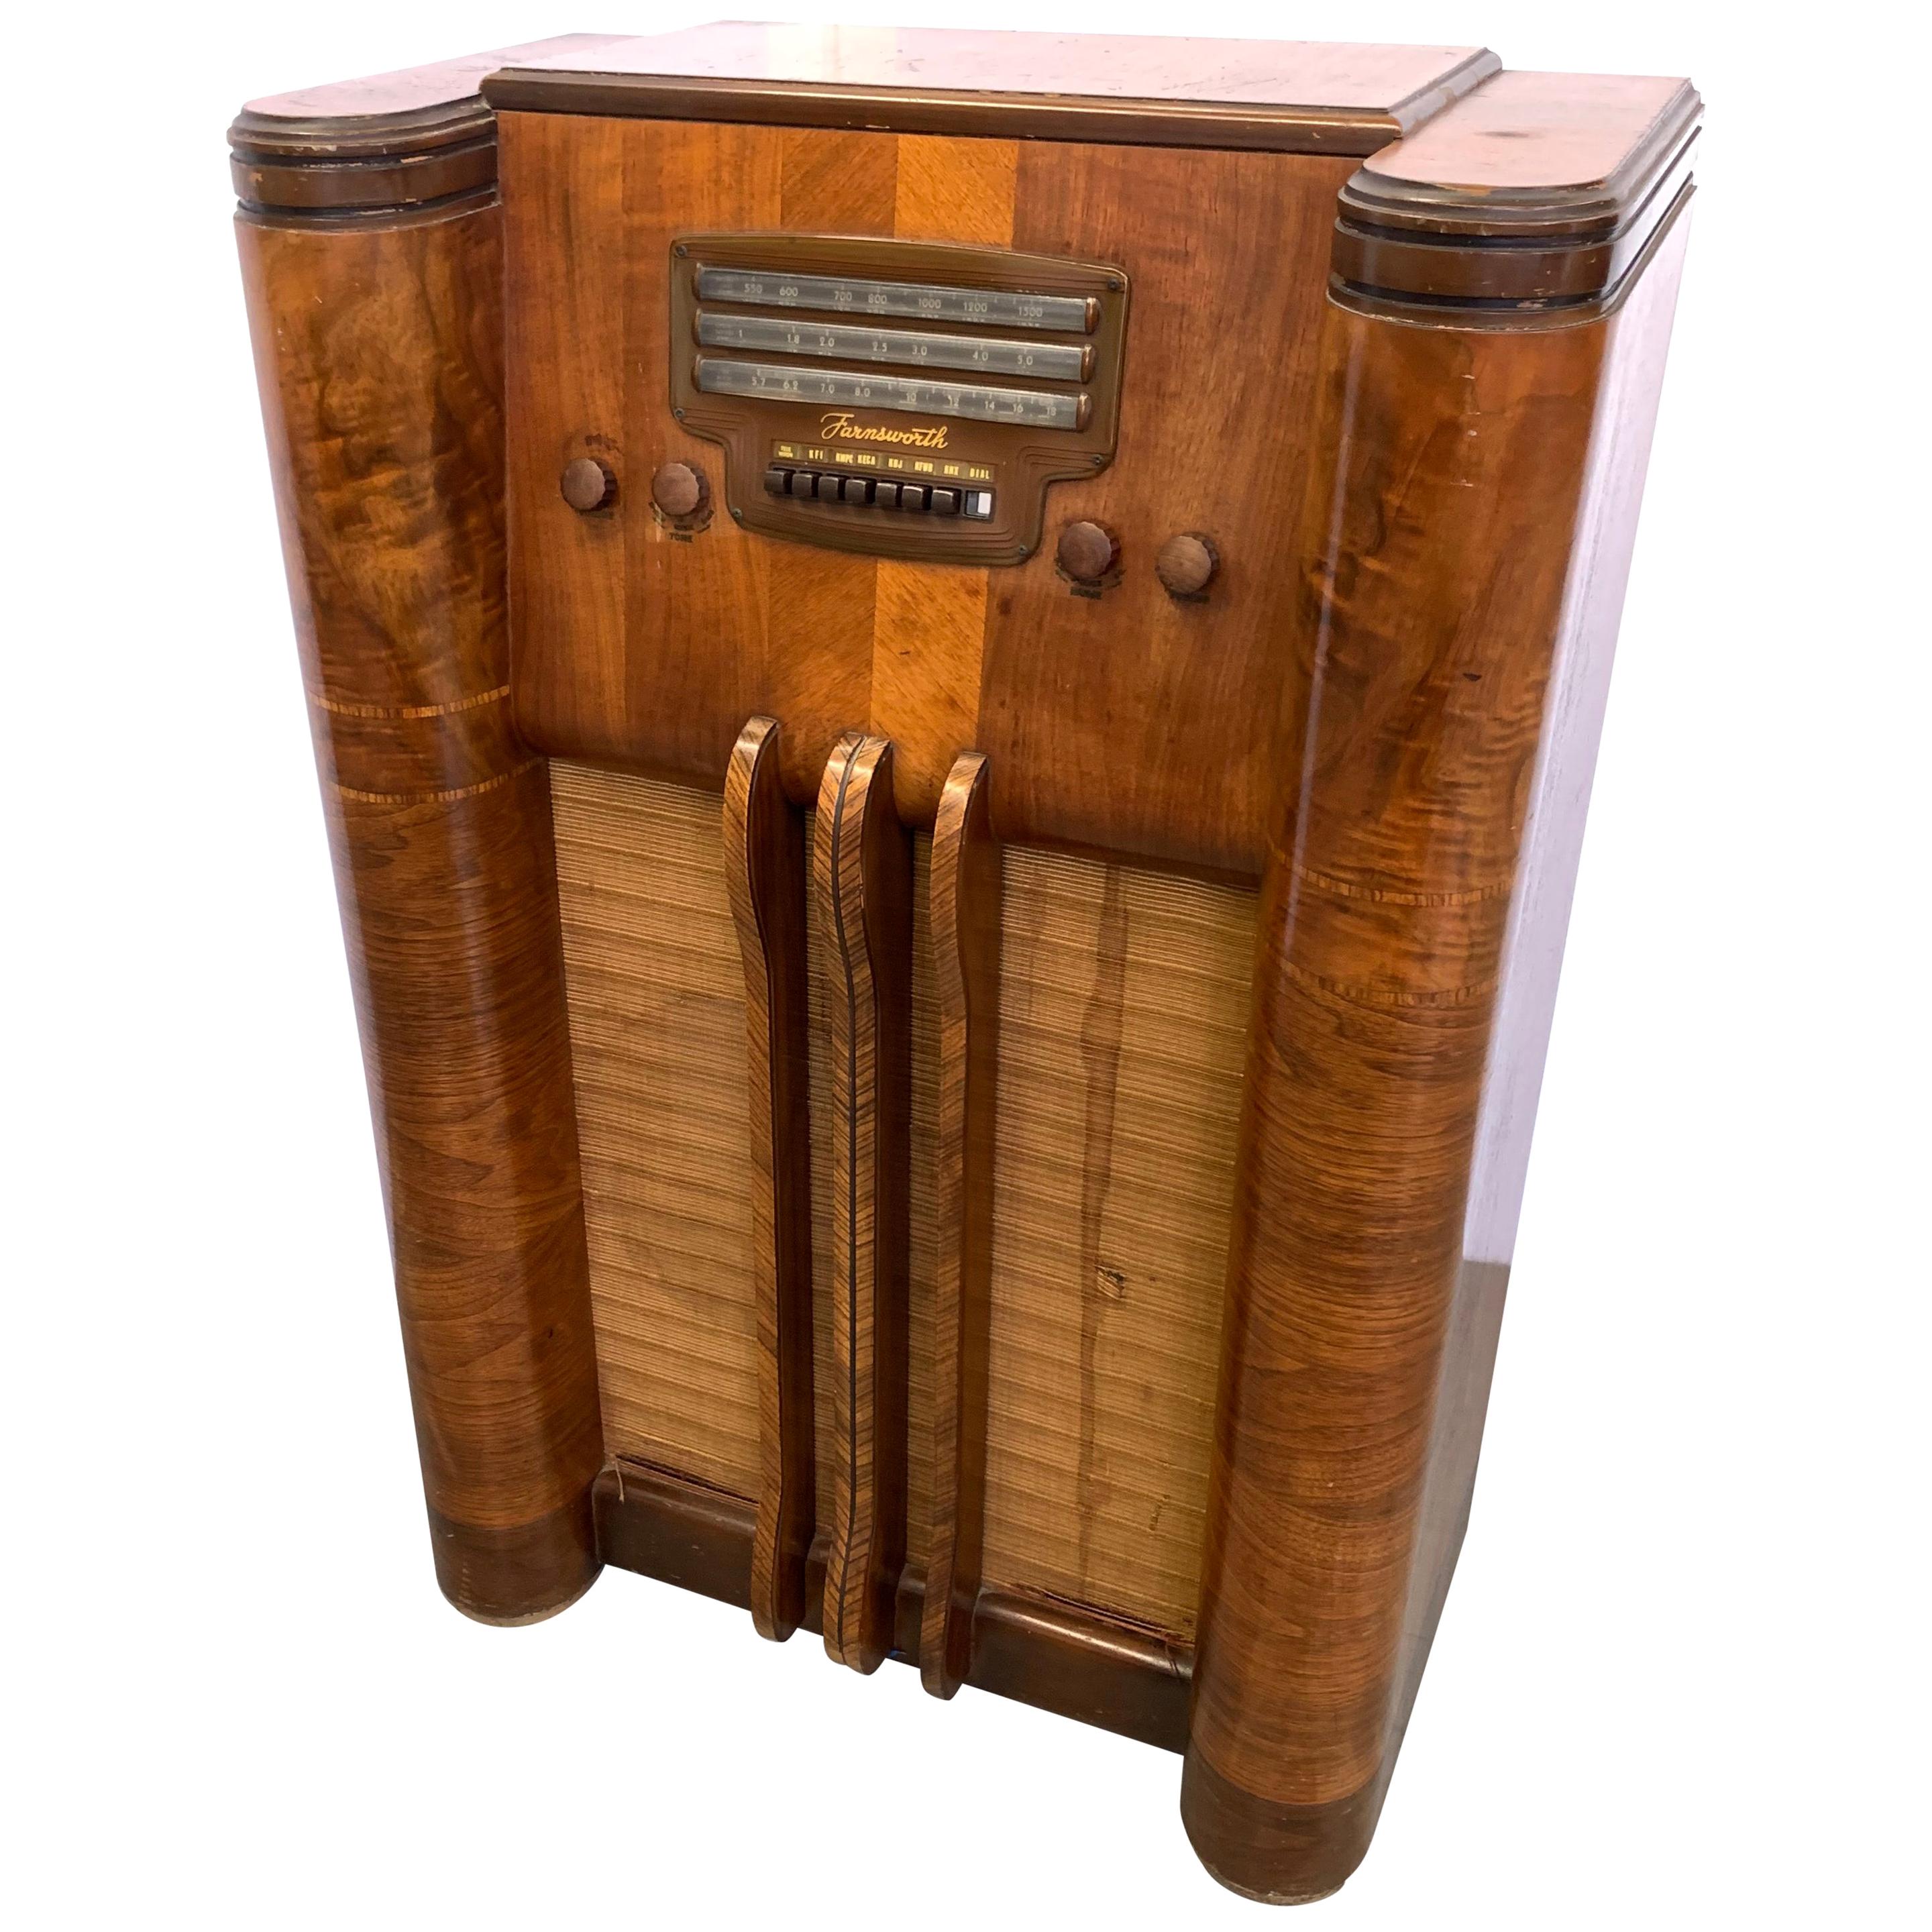 Decorative floor radio by Farnsworth Television & Radio Corp, 1940
No electronic parts are preserved, mainly for decorative purpose.

Philo Taylor Farnsworth (August 19, 1906 – March 11, 1971) was an American inventor and television pioneer.